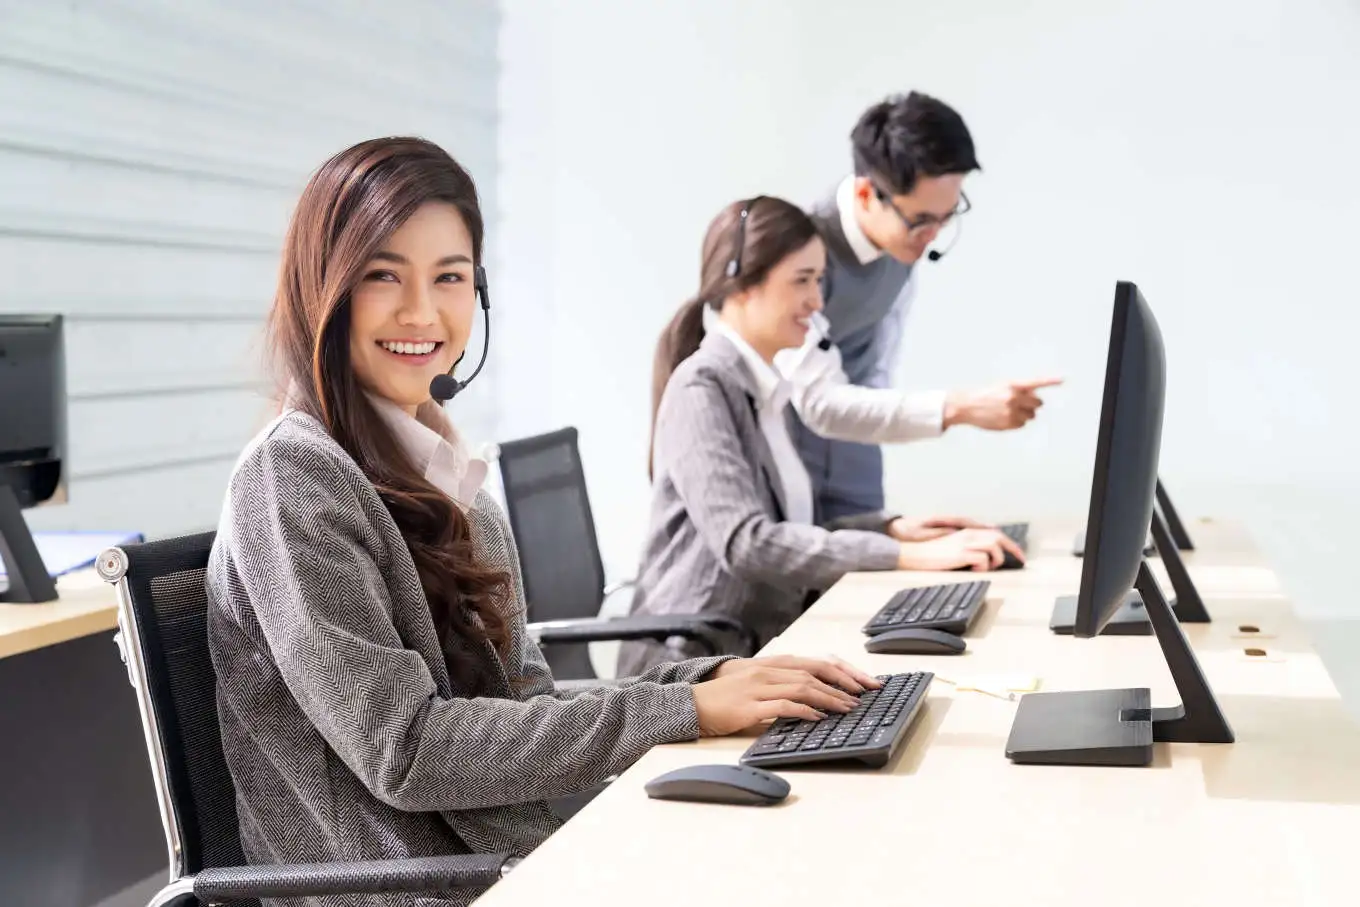 A girl is smiling while working in the call centre office